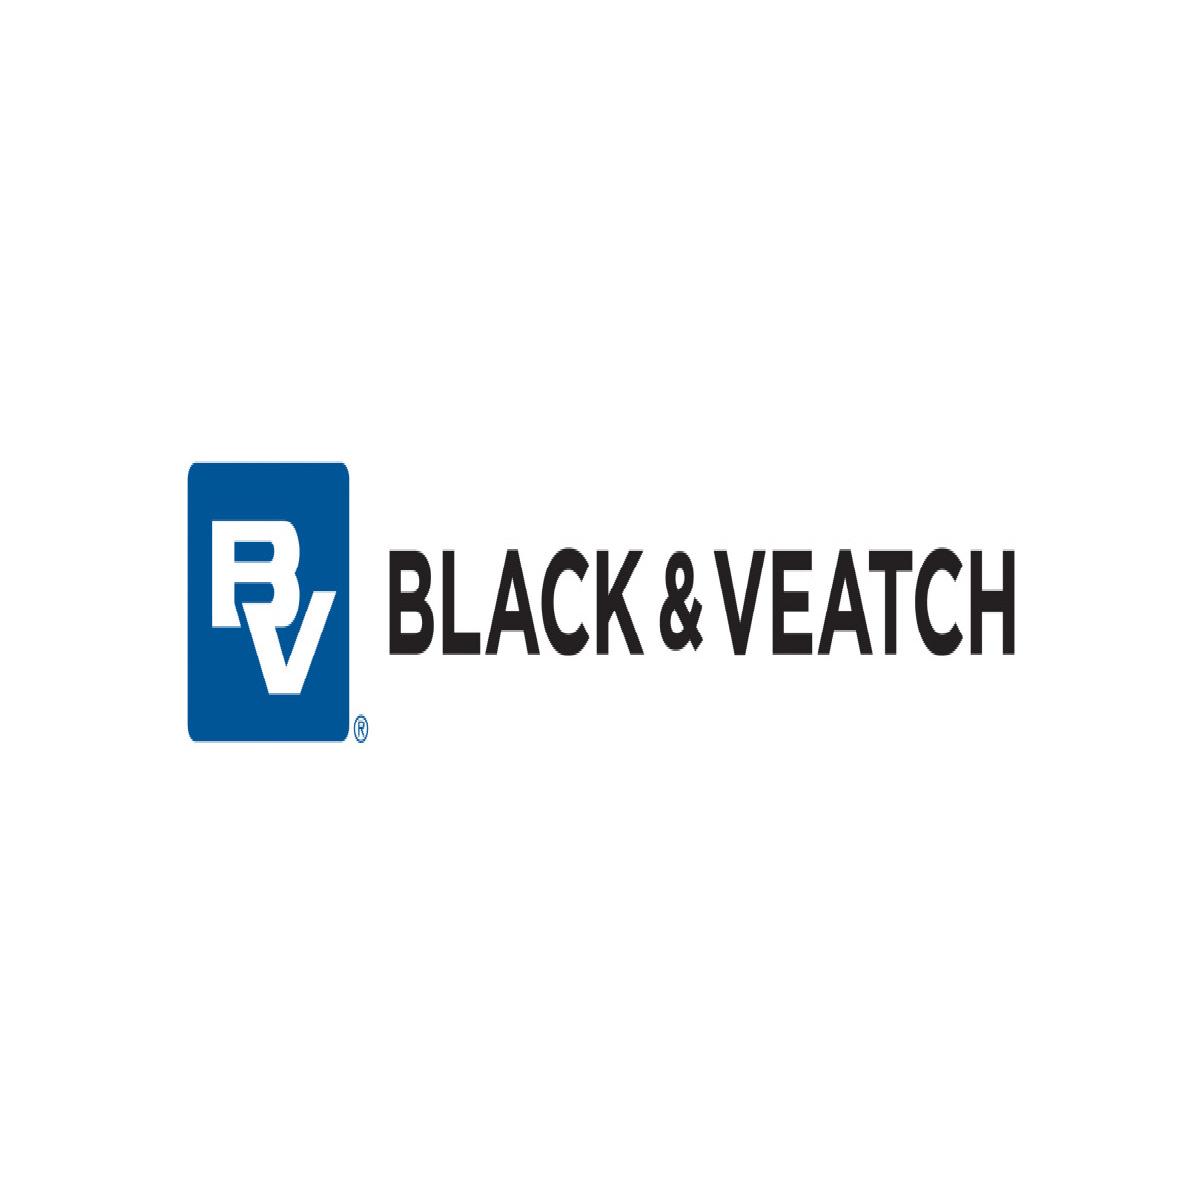 Black & Veatch Completes World’s First Commercial-Scale Alternative Animal Feed Production Facility